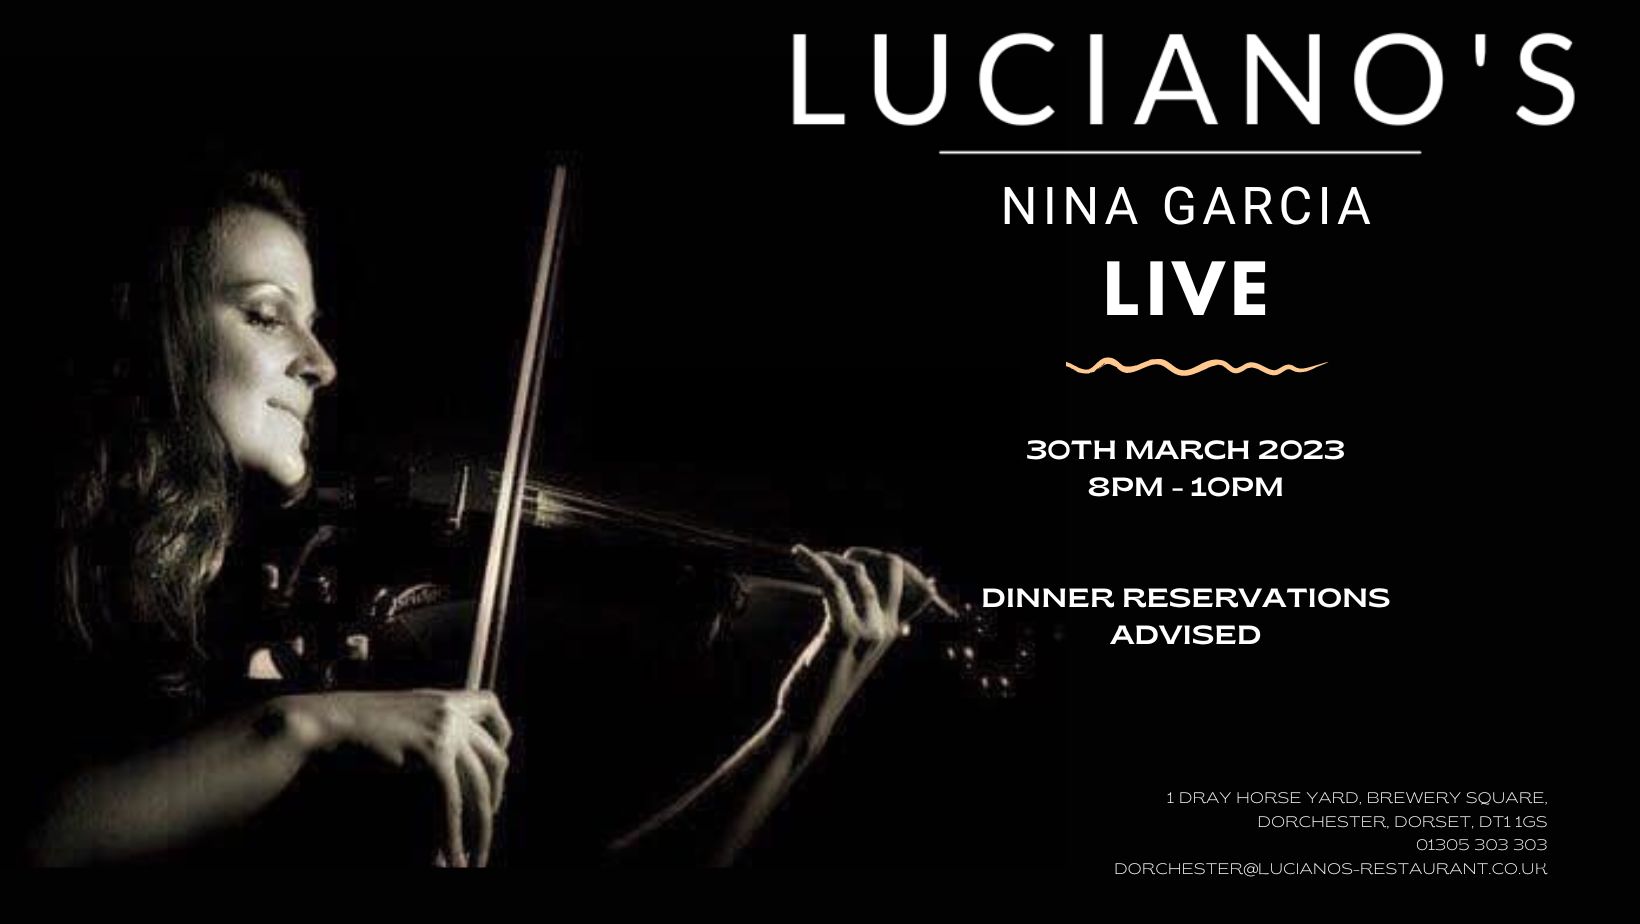 NINA GARCIA LIVE AT LUCIANOS 30TH MARCH